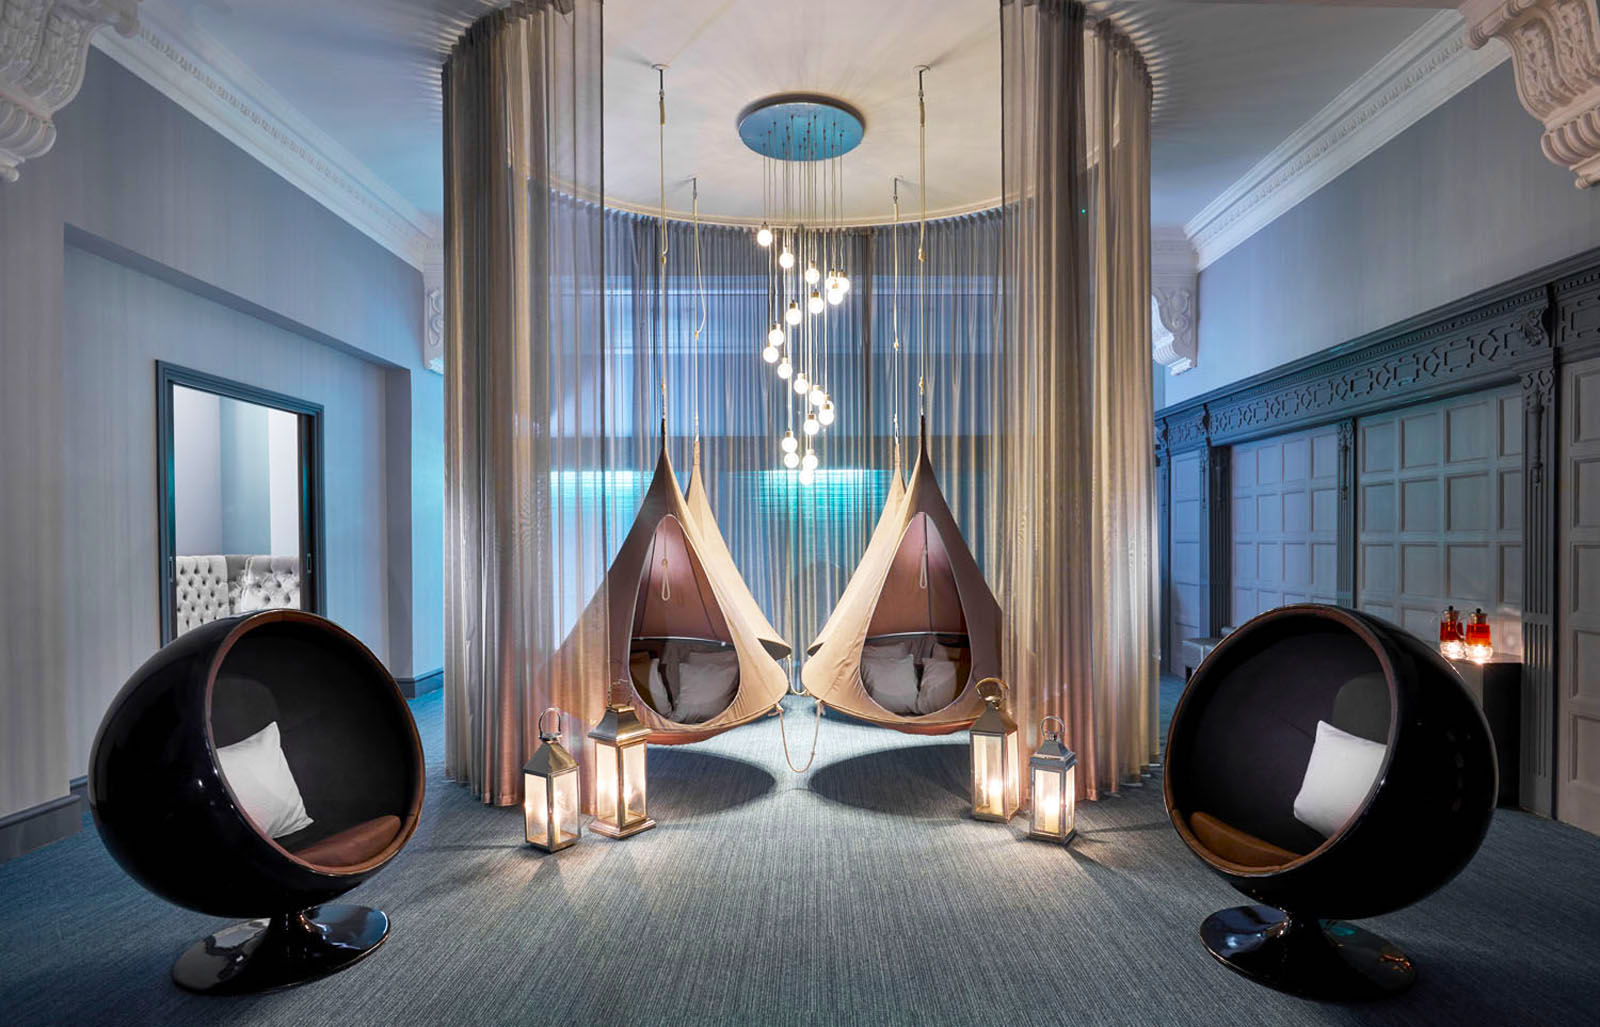 Morning Time Spa Day , Rena Spa At The Midland Hotel